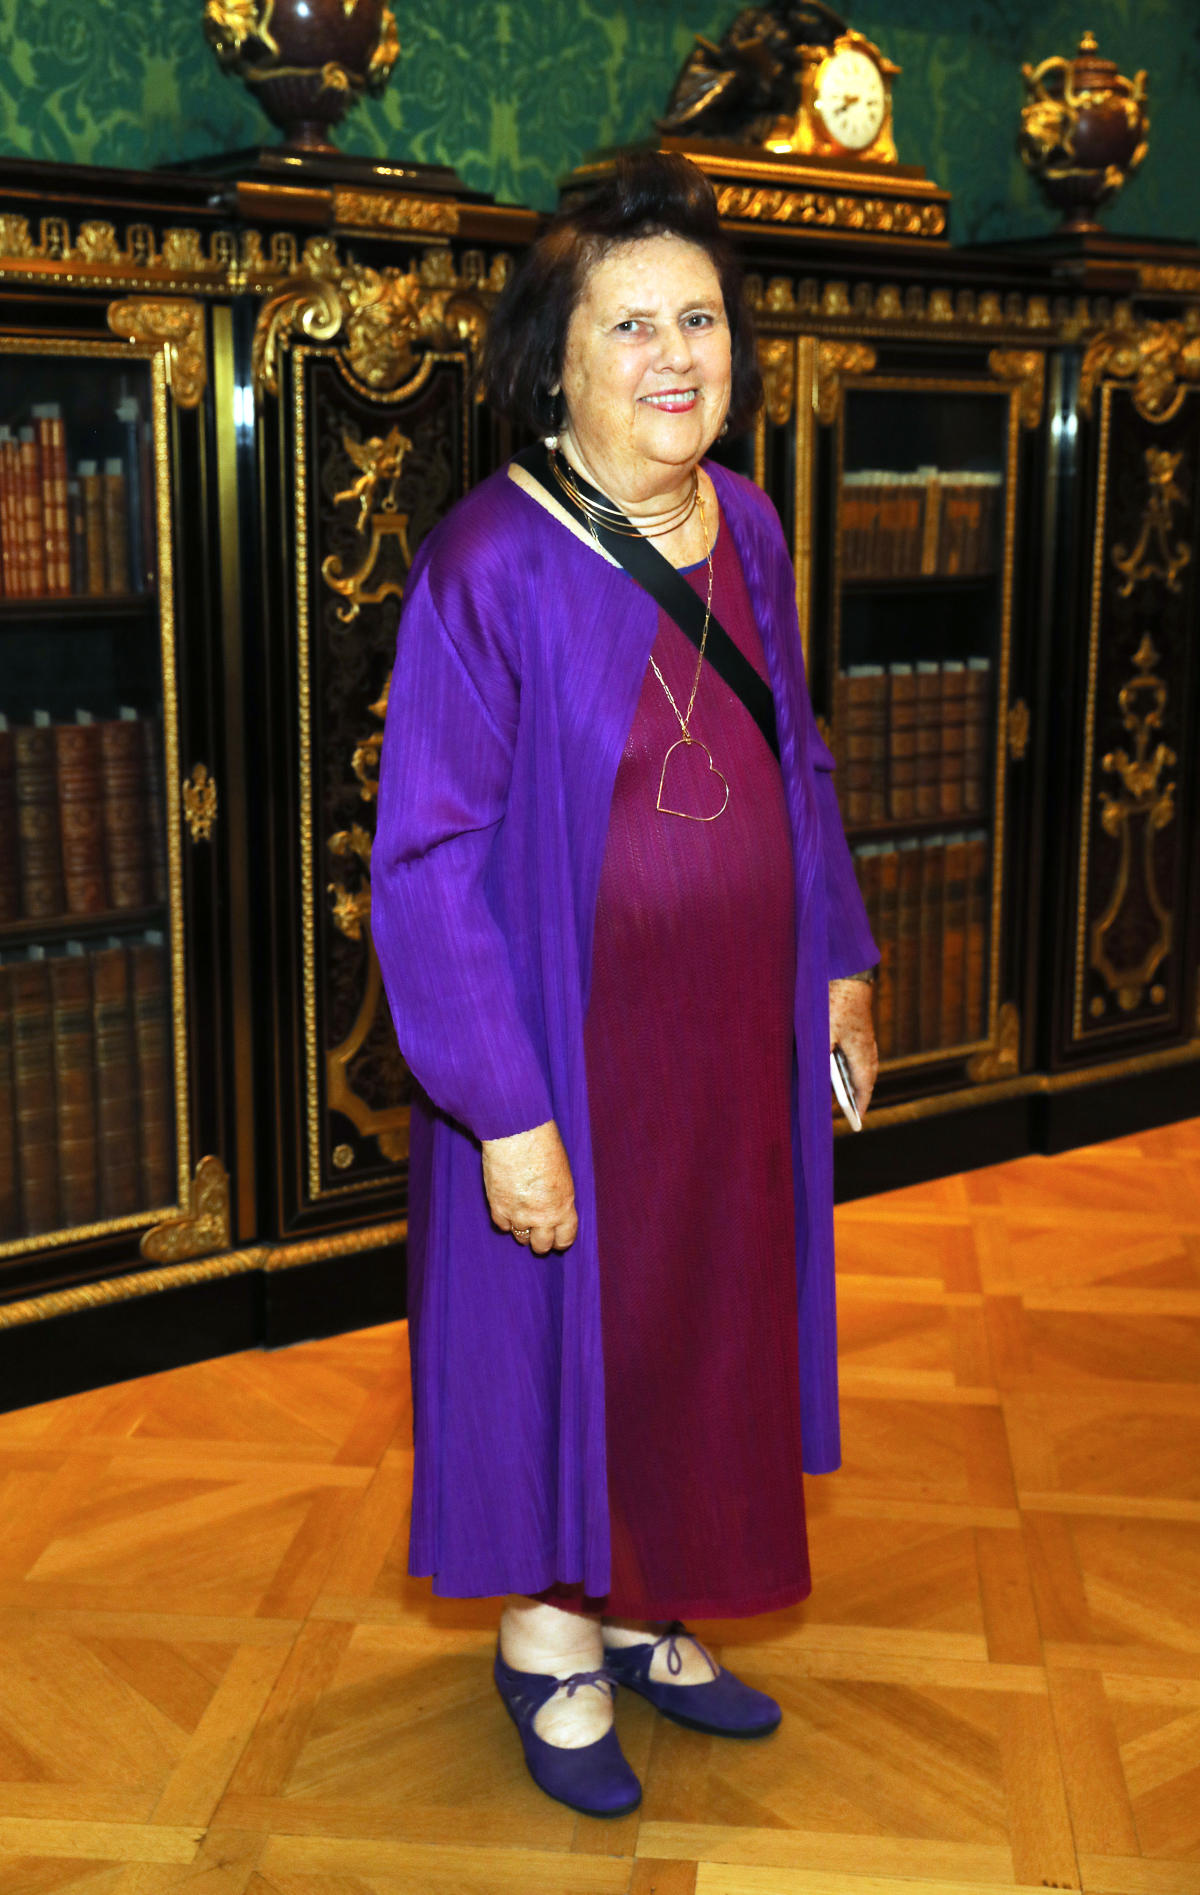 Media People: Moving On With Suzy Menkes